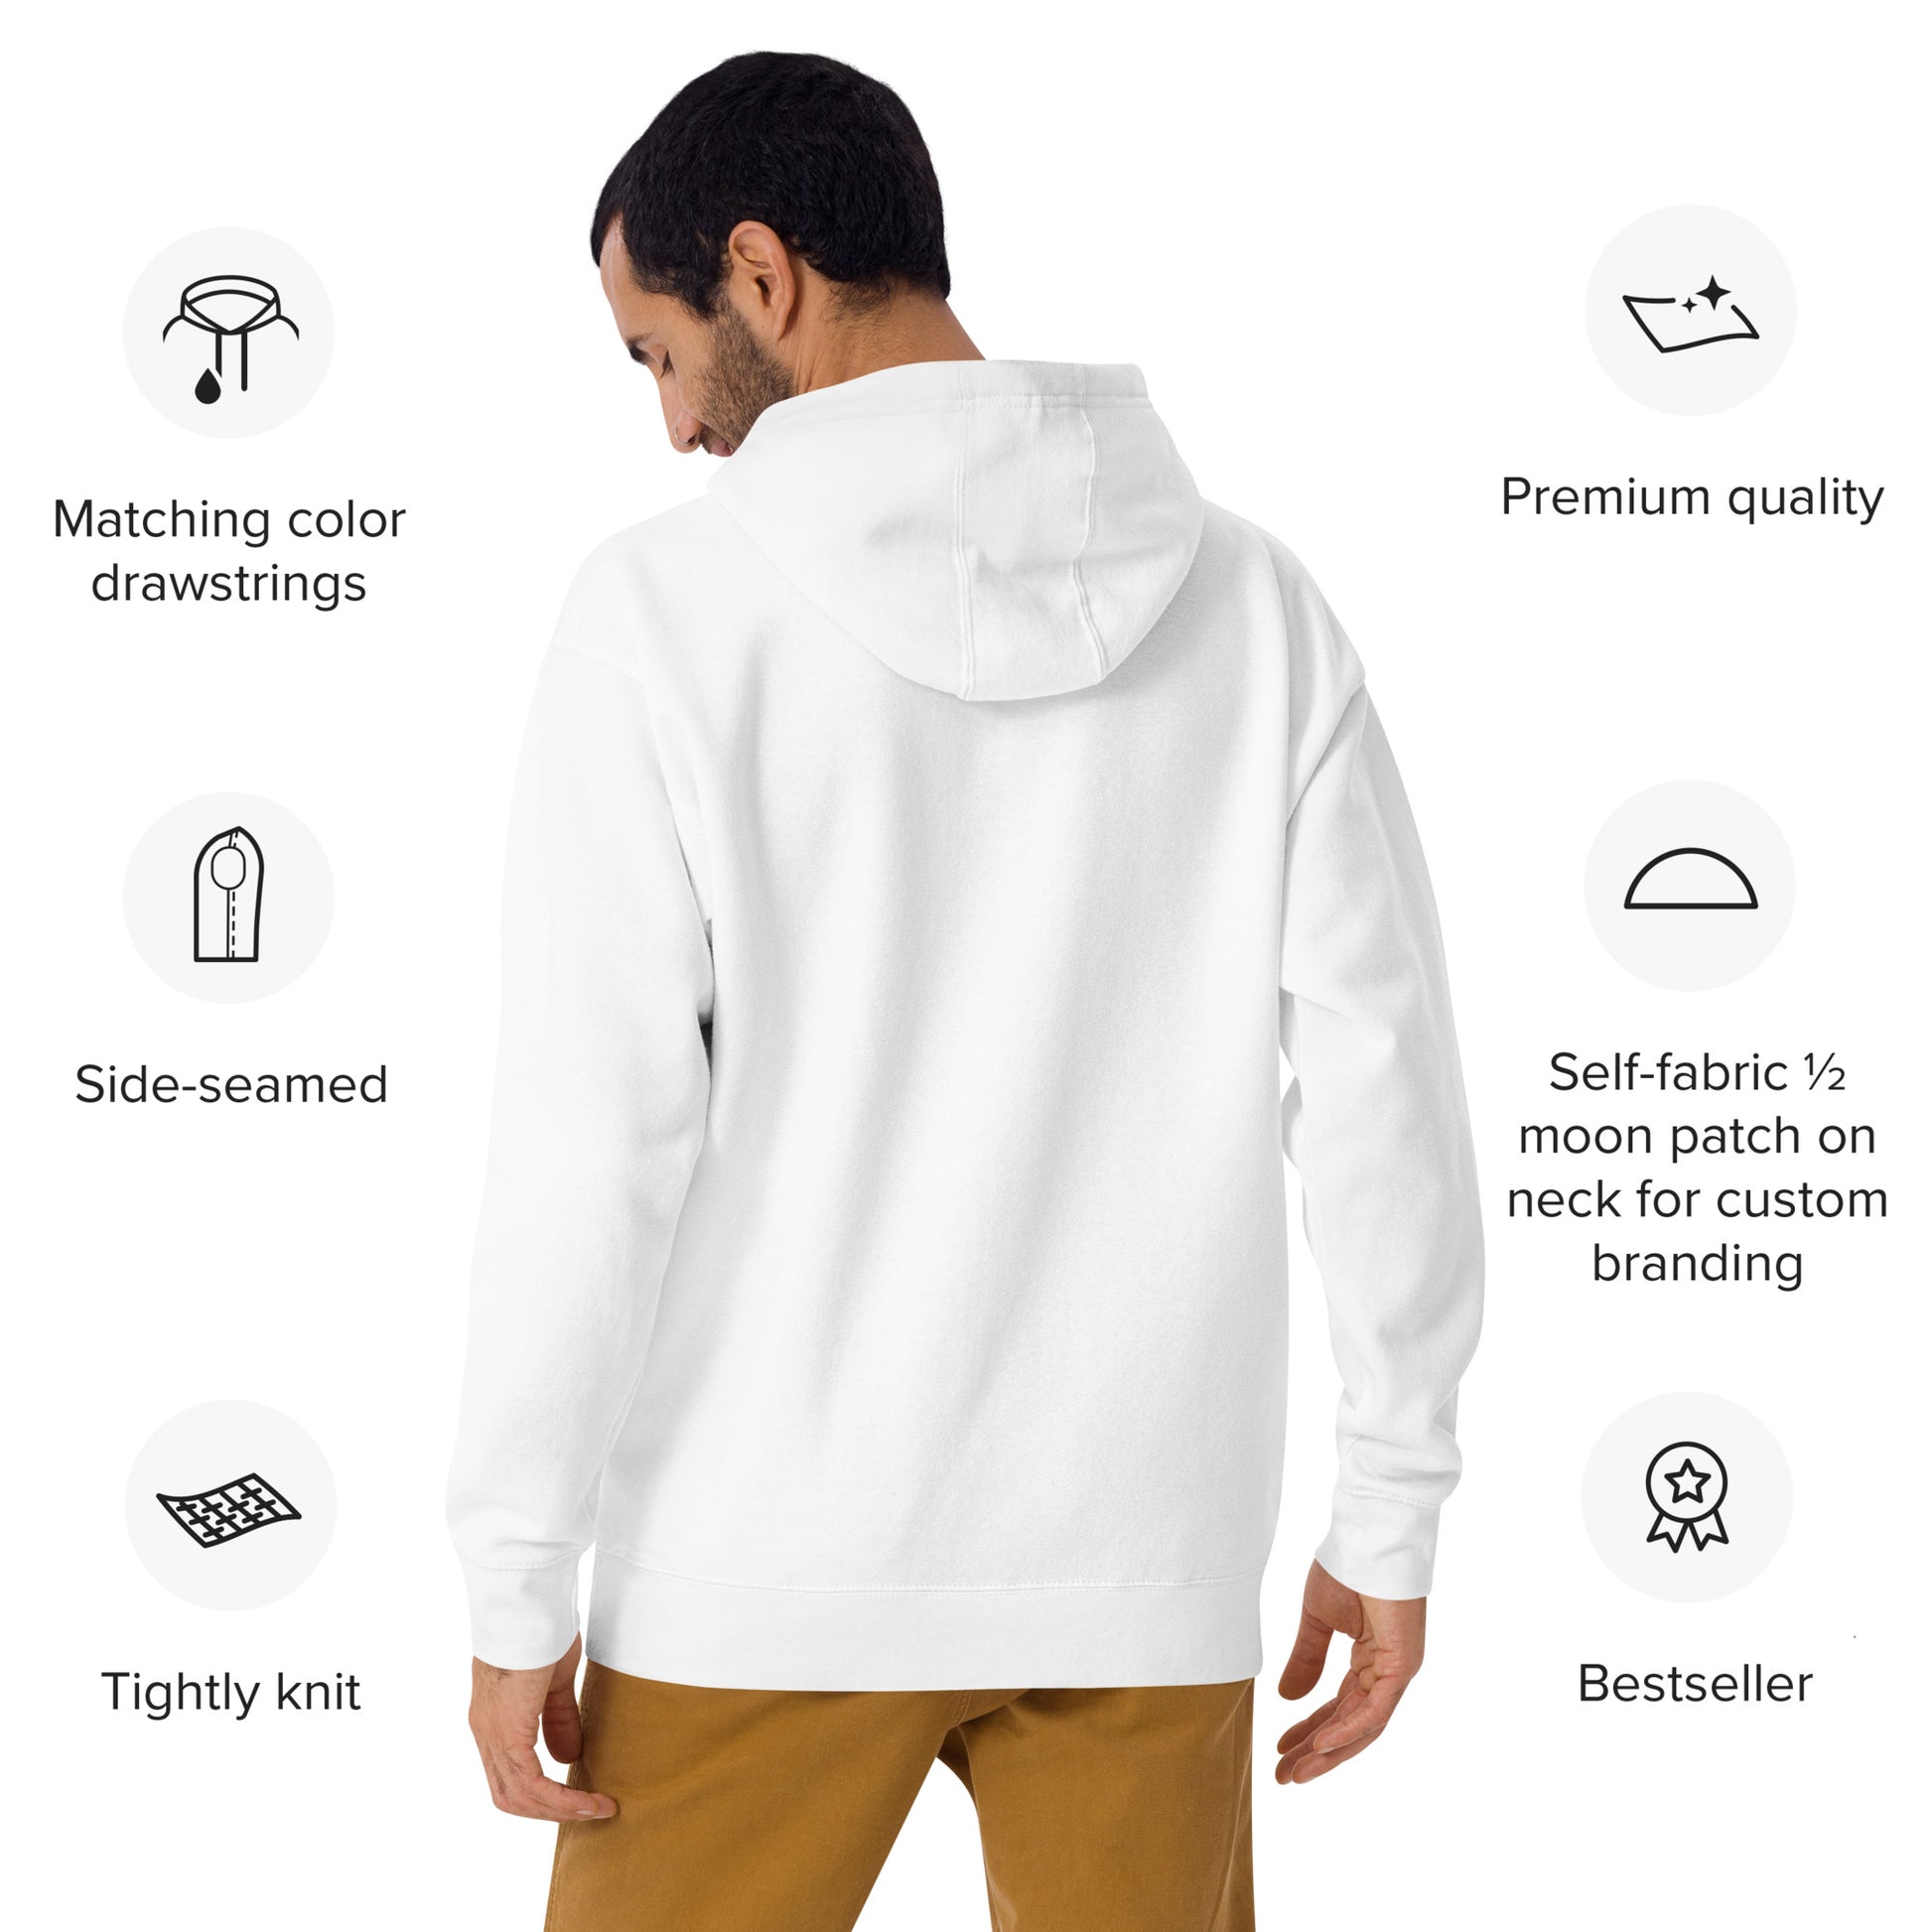 back of hoodie showing features such as side-seamed, tightly knit, premium quality etc